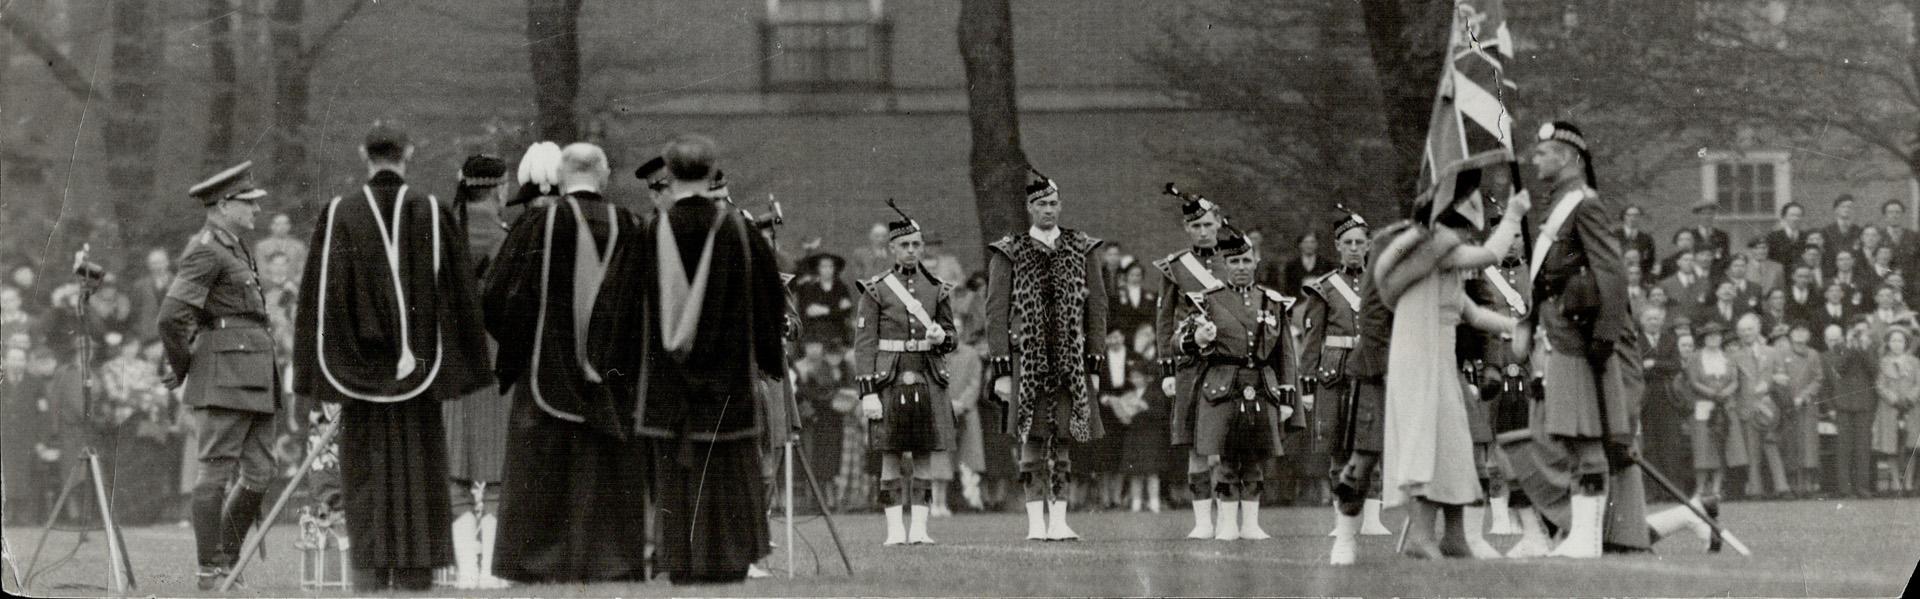 The queen had an important function all to herself in Toronto - the presentation of colors to her regiment, the Toronto Scottish. The ceremony on the (...)